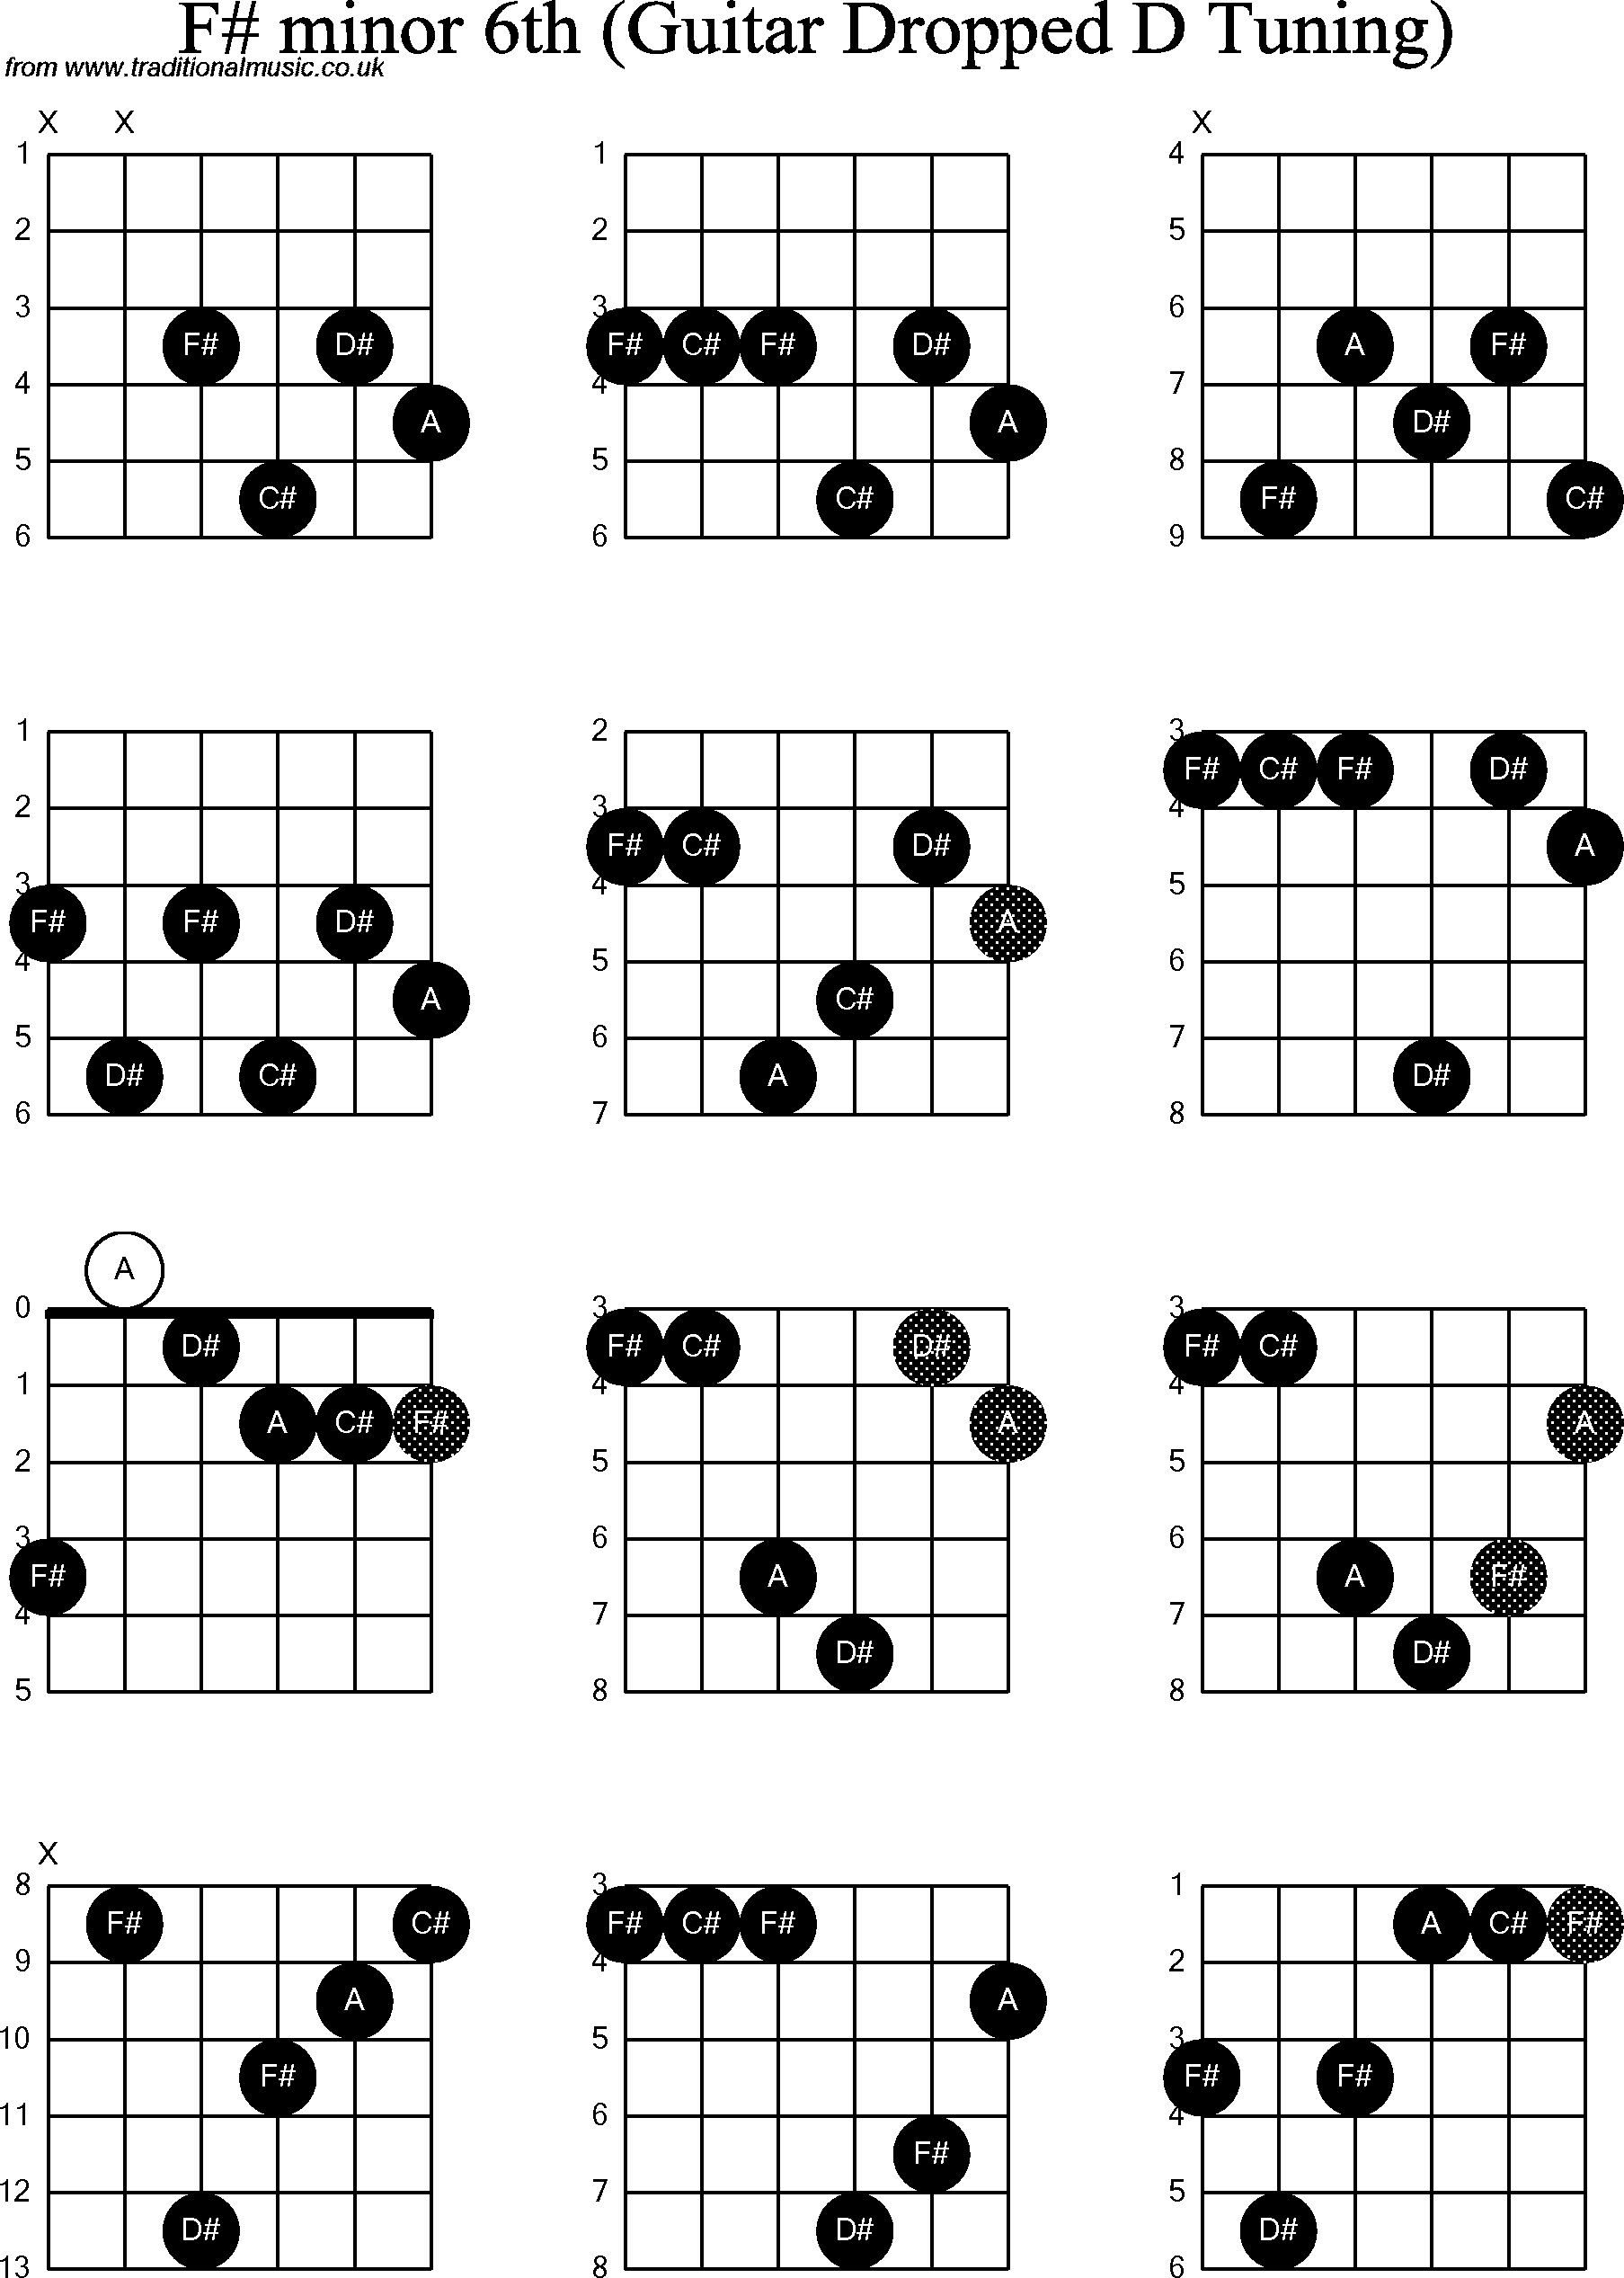 Chord diagrams for dropped D Guitar(DADGBE), F Sharp Minor6th